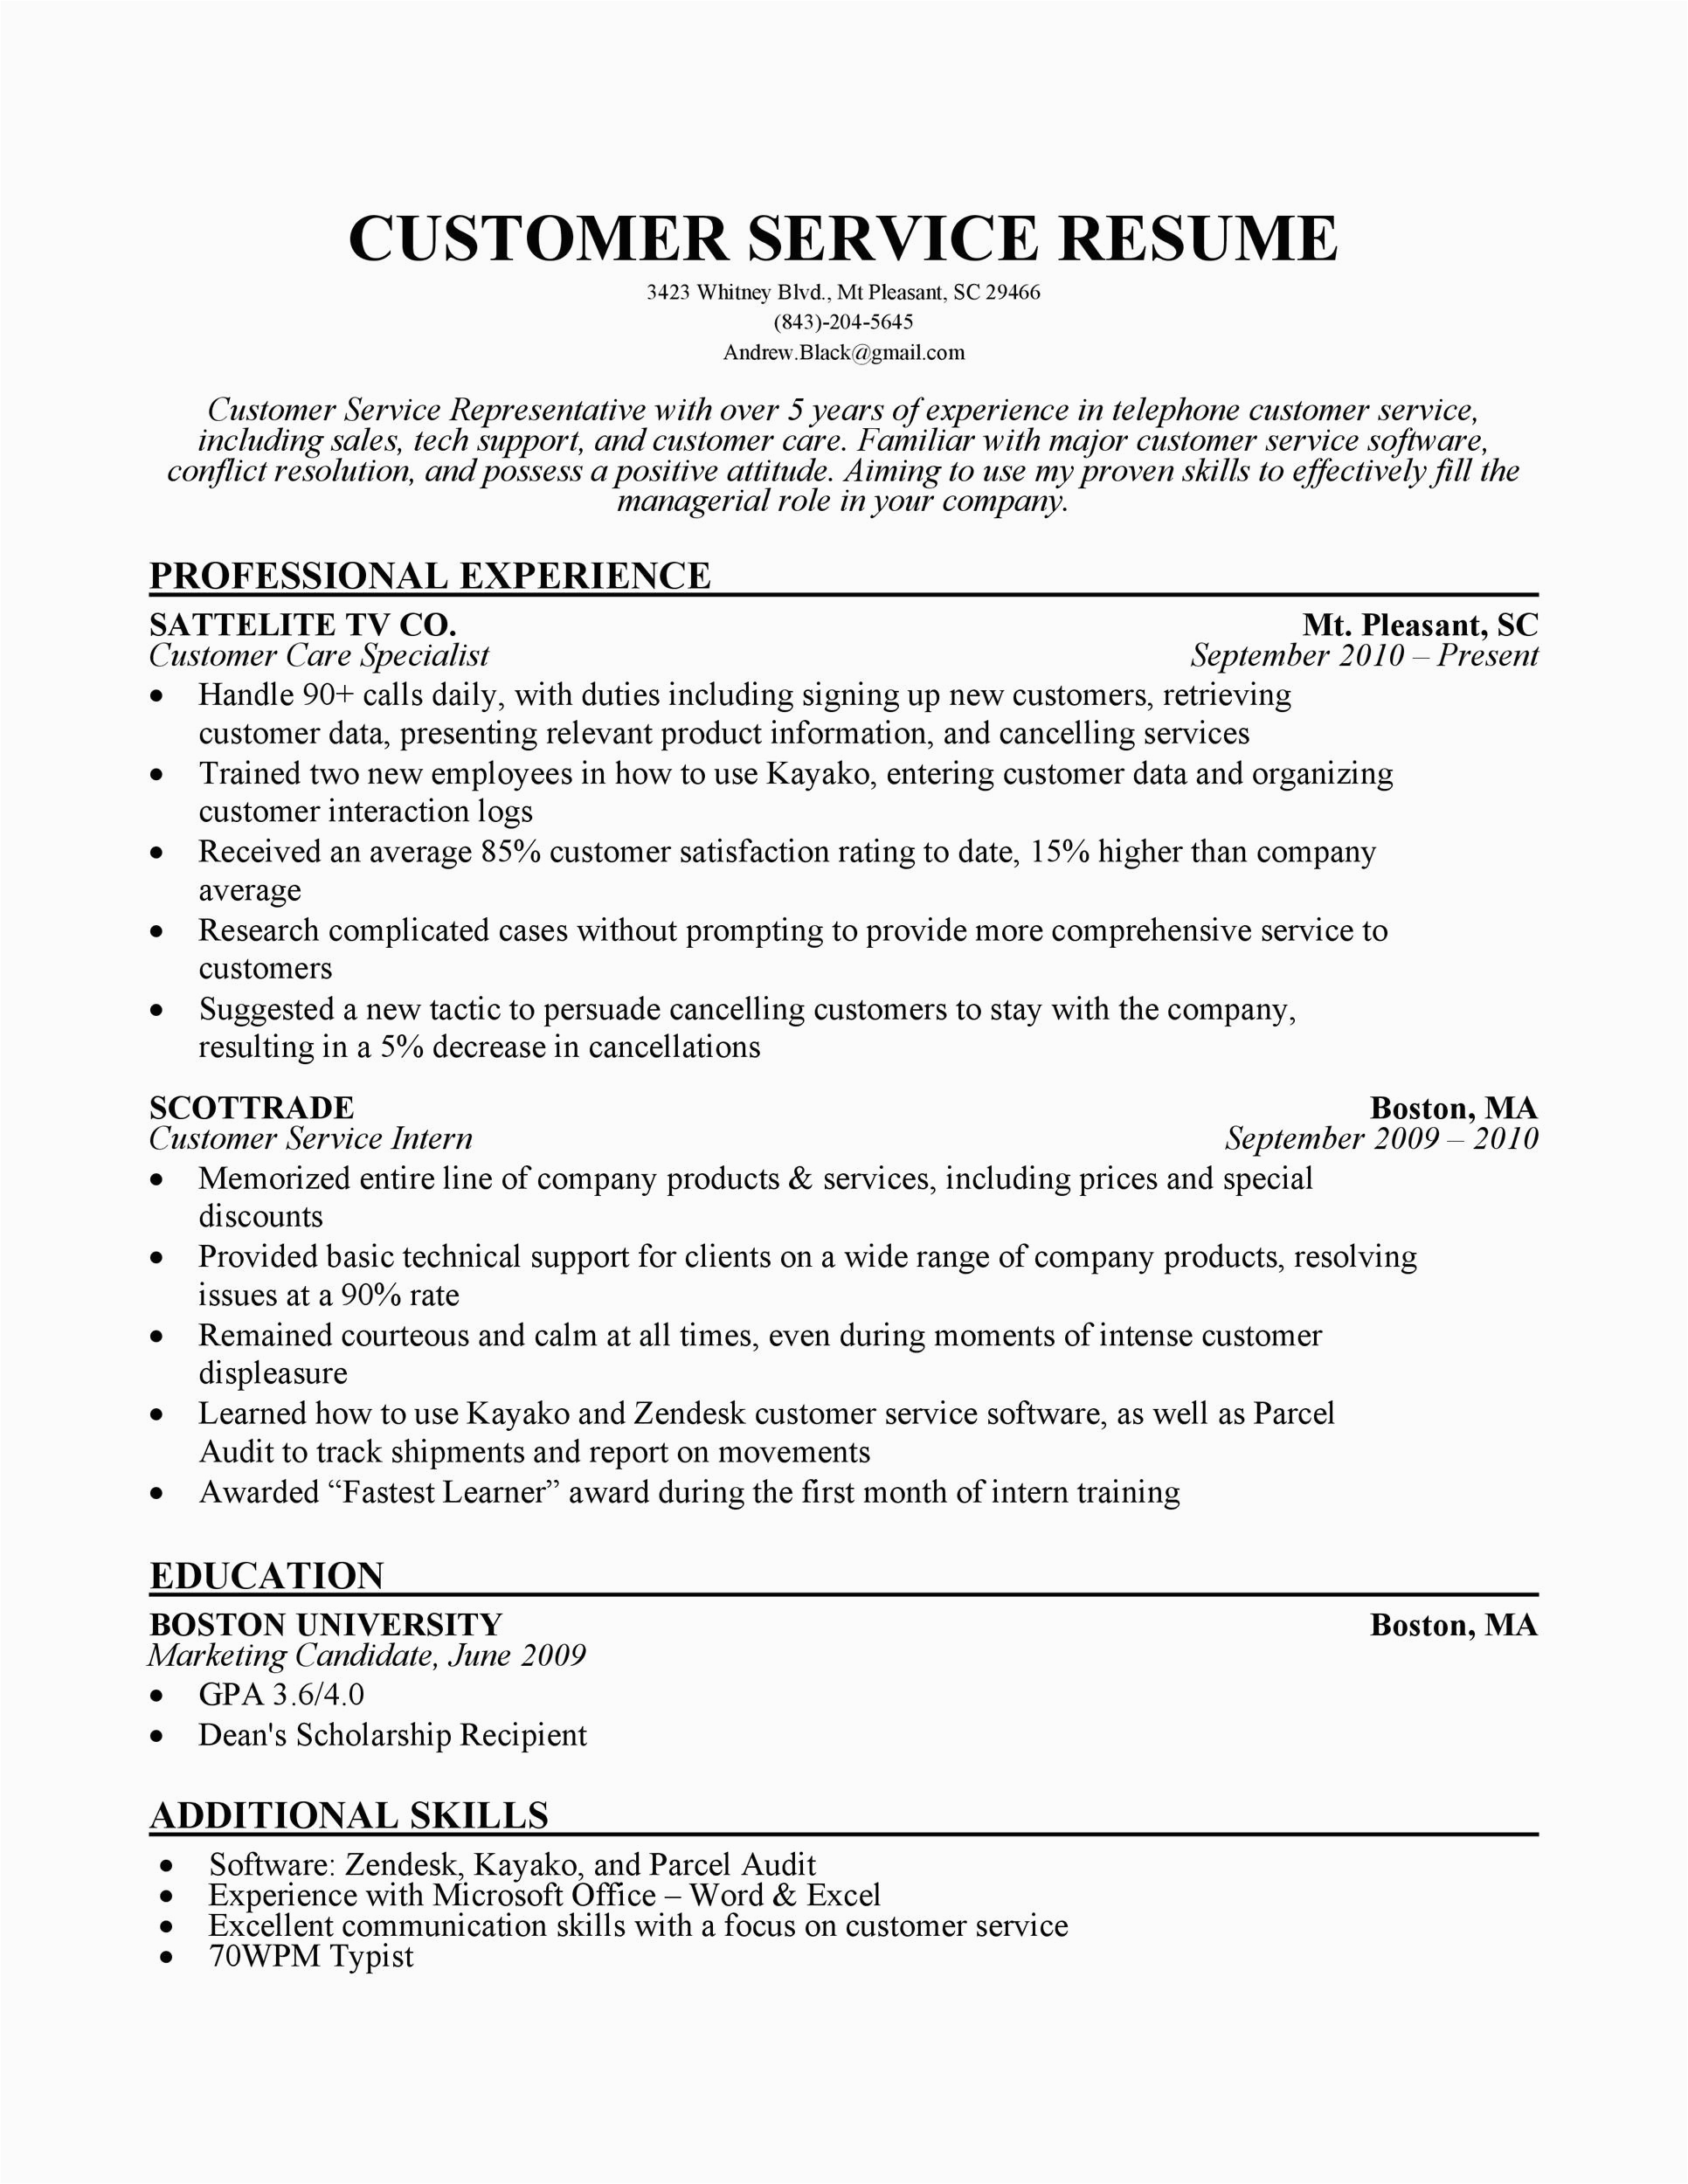 Free Resume Templates for Customer Service Representative 30 Customer Service Resume Examples Templatelab